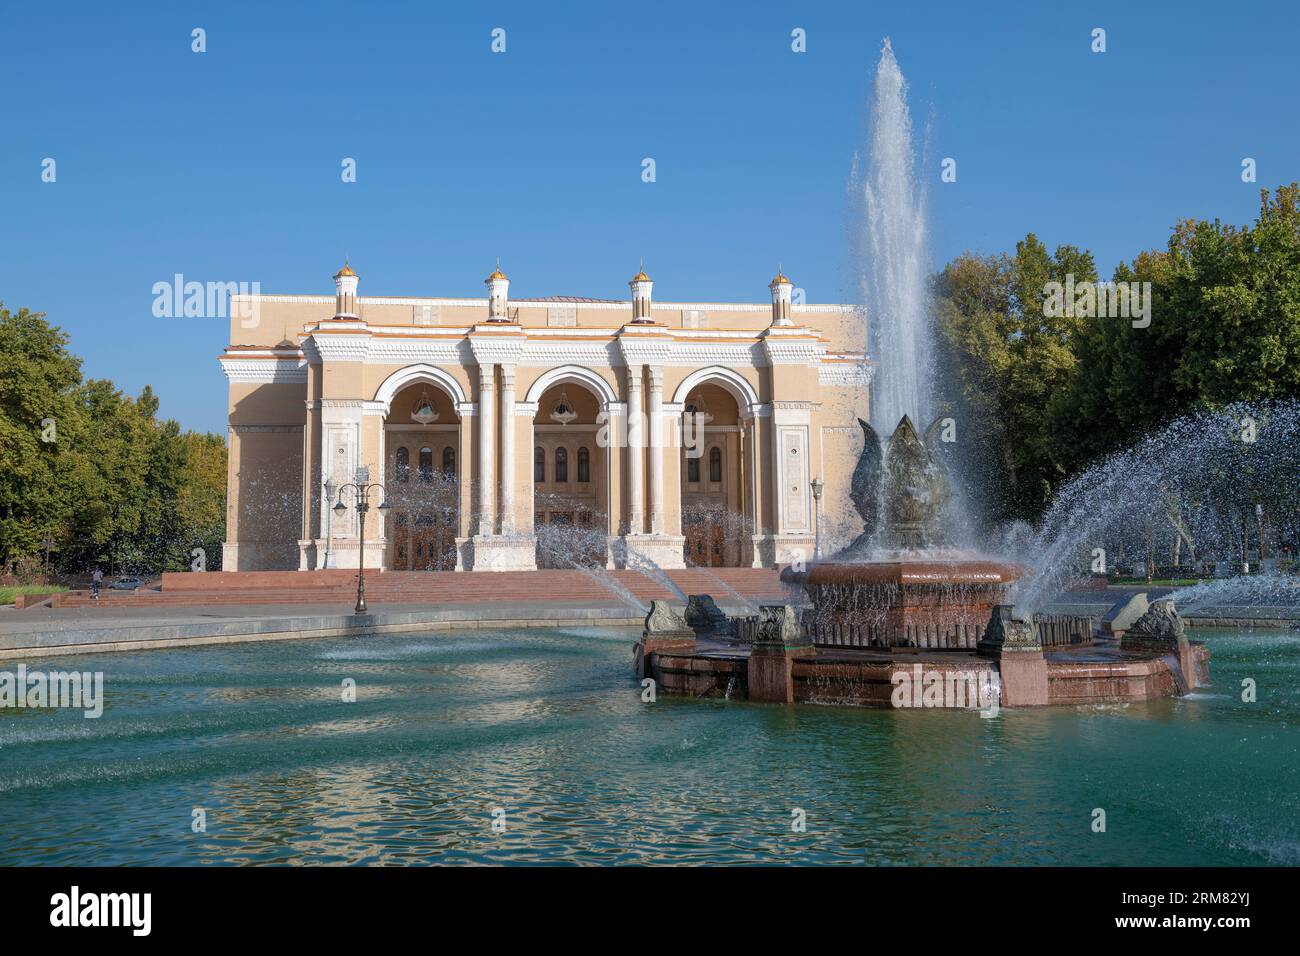 TASHKENT, UZBEKISTAN - SEPTEMBER 15, 2022: Fountain at the building of the State Academic Big Theater named Alisher Navoi on a sunny September day Stock Photo